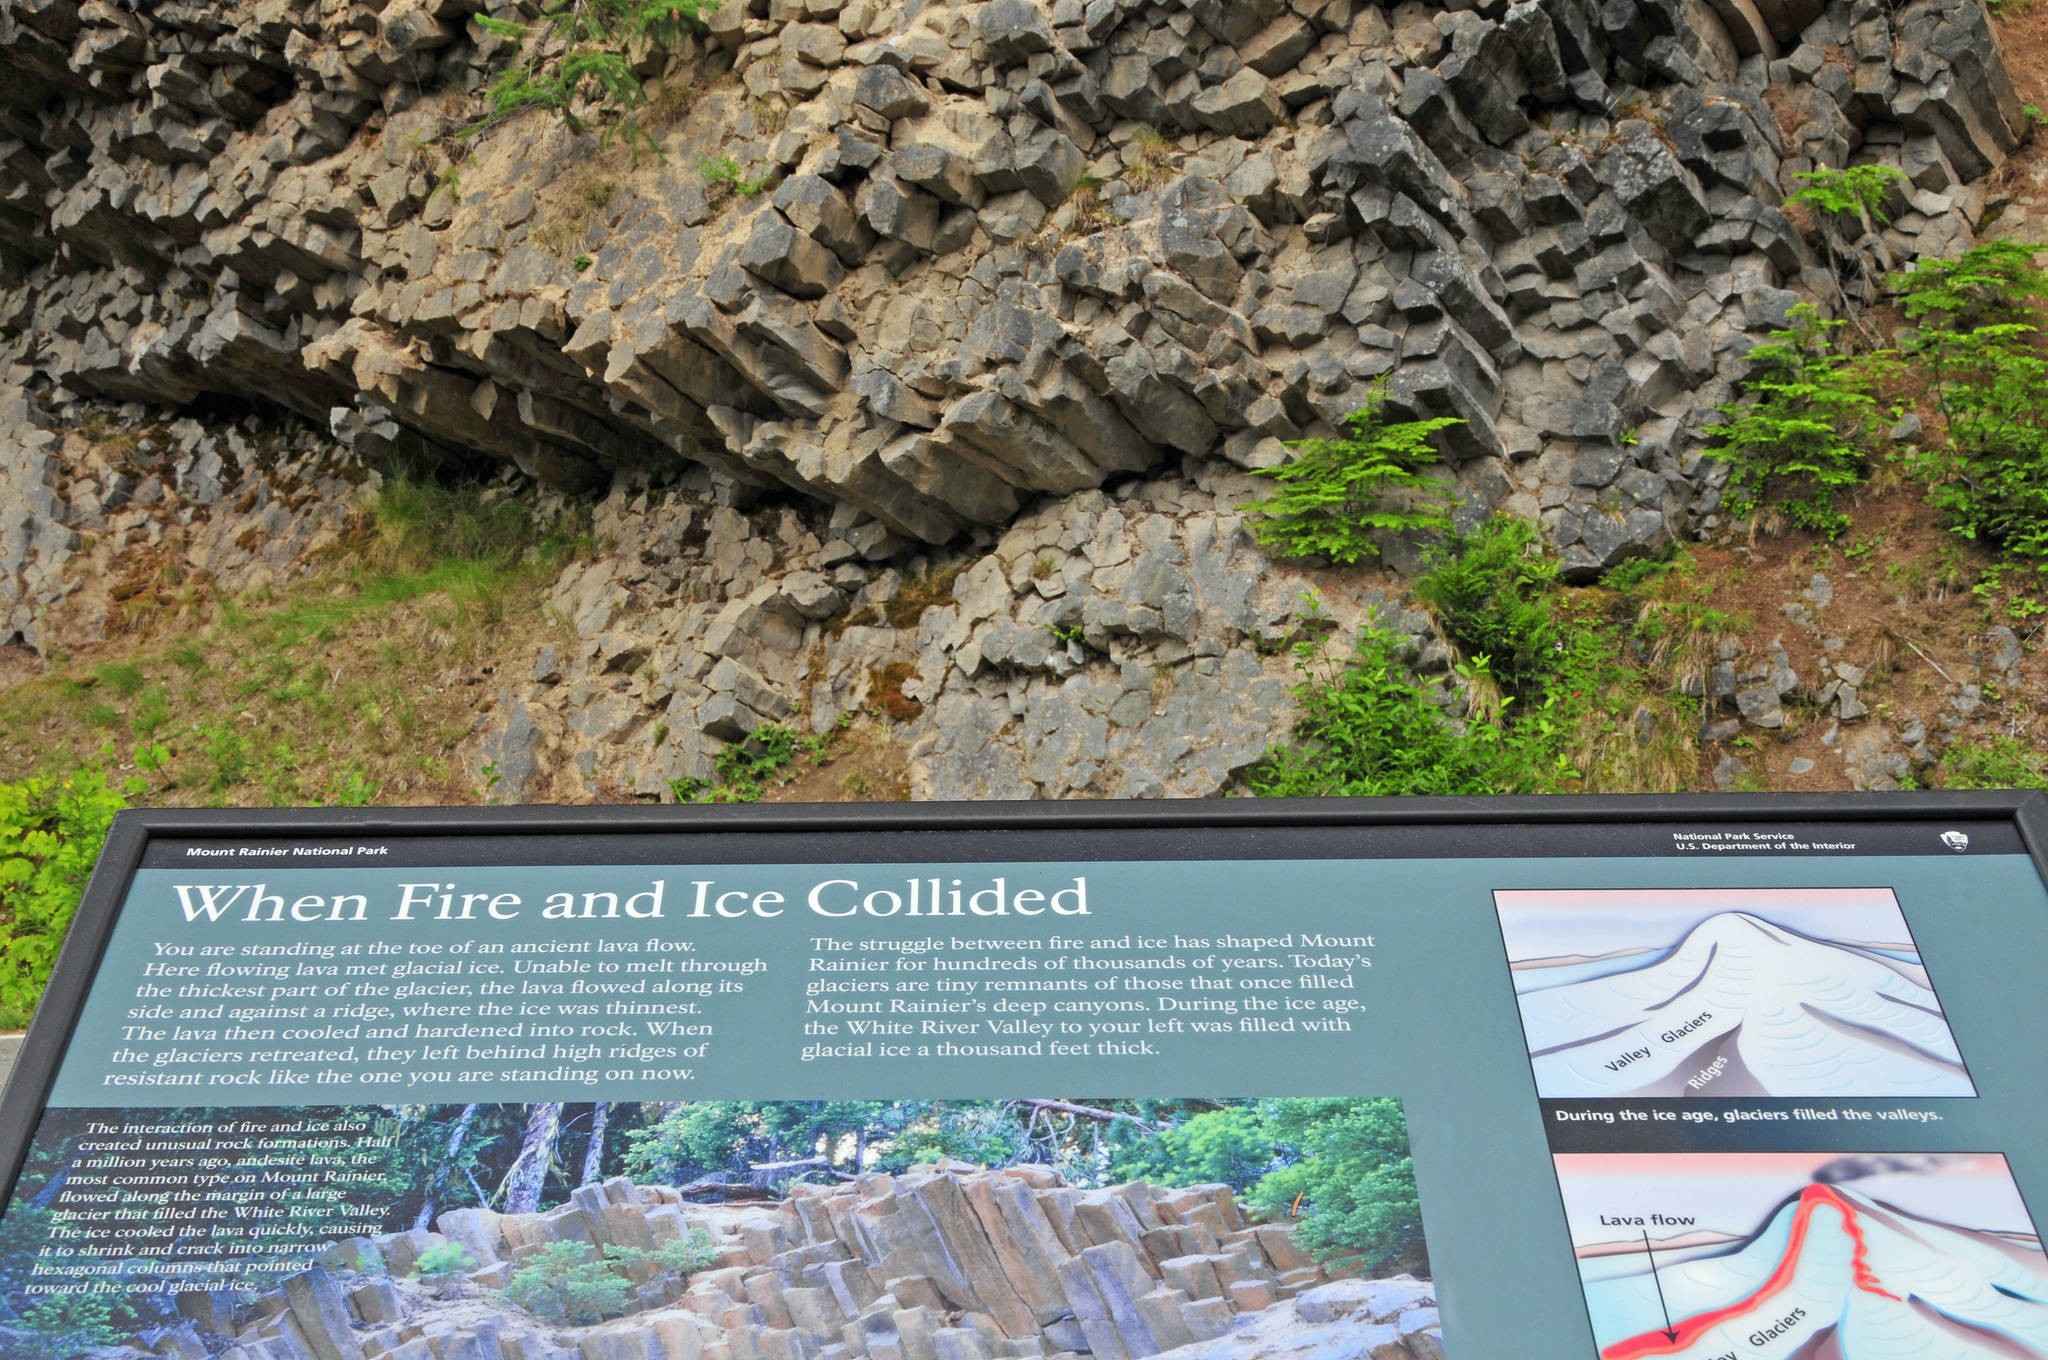 This Sept. 6, 2008 photo provided by John Chao shows the Fire & Ice sign in Mount Rainier National Park in Washington. Photographer John Chao captured this good example of how interpretive signs work best: this panel in the park is placed in front of the geological feature it describes, so visitors can see the landscape and read about it at the same time. (John Chao via AP)